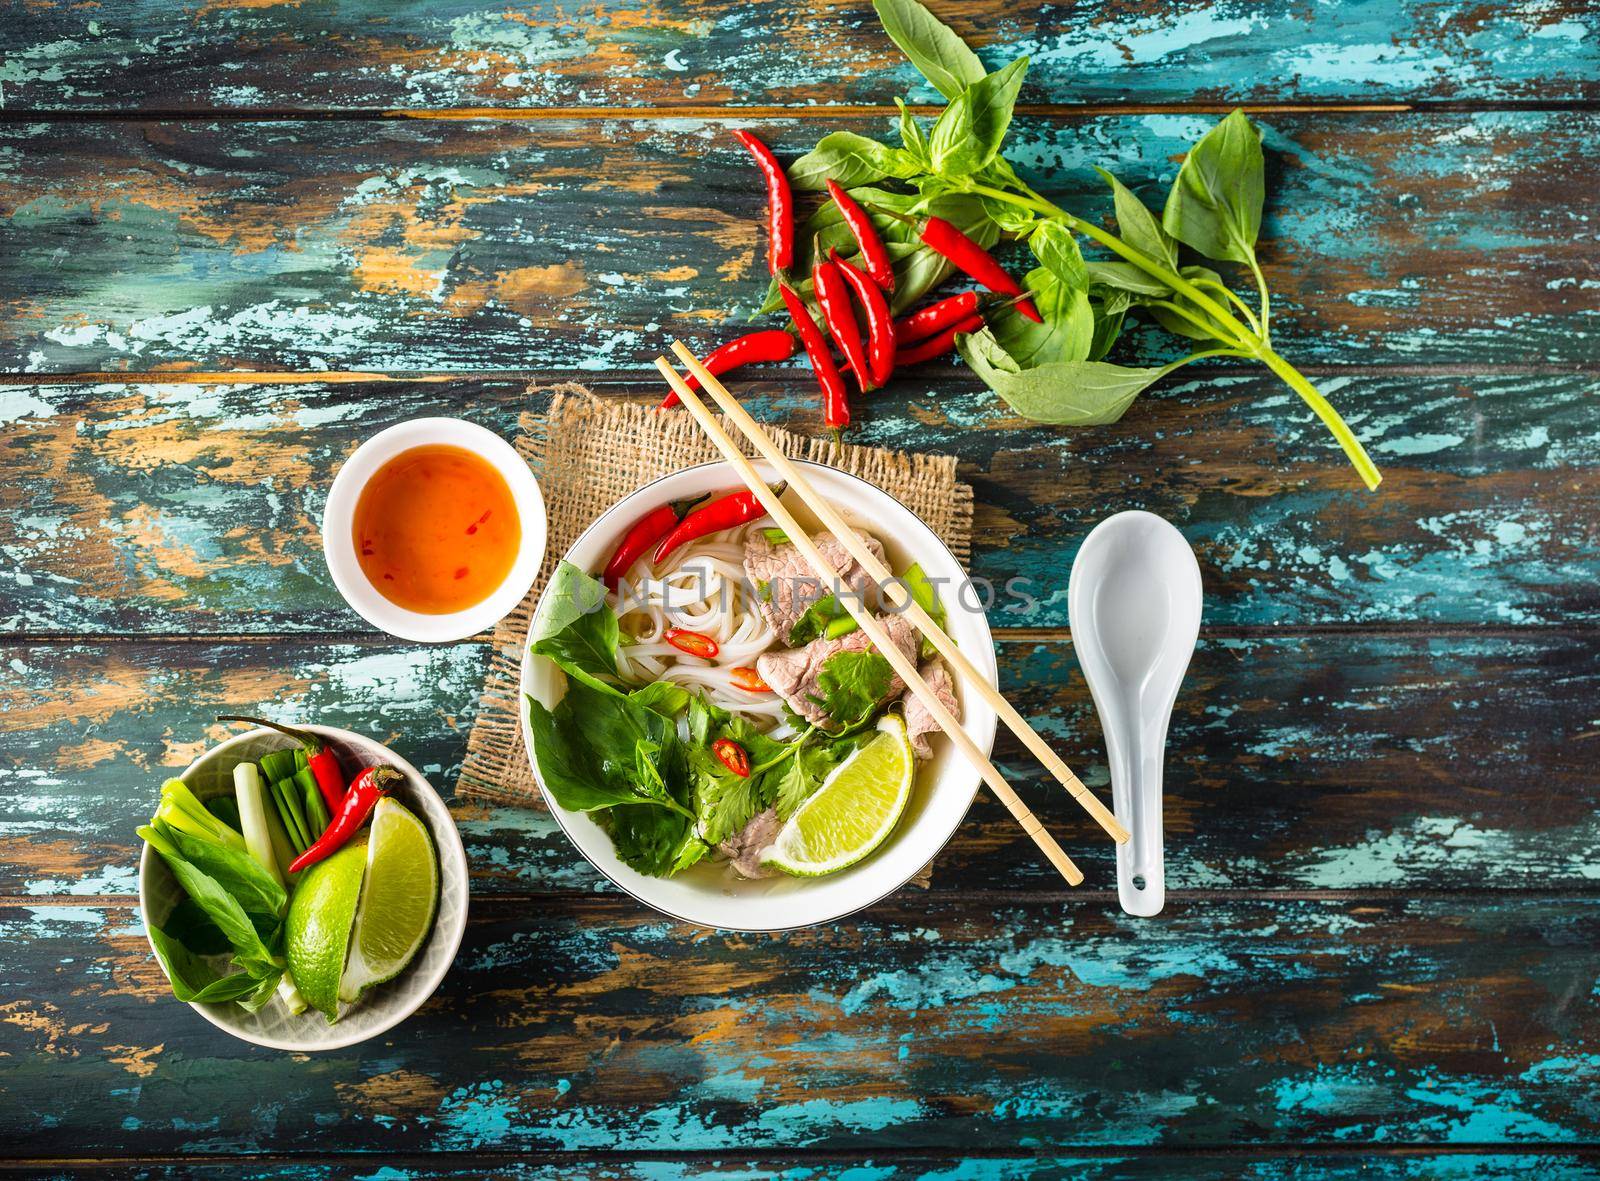 Traditional Vietnamese soup Pho bo with herbs, meat, rice noodles, broth. Pho bo in bowl with chopsticks, spoon. Top view. Asian soup Pho bo, wooden table background. Vietnamese authentic tasty soup